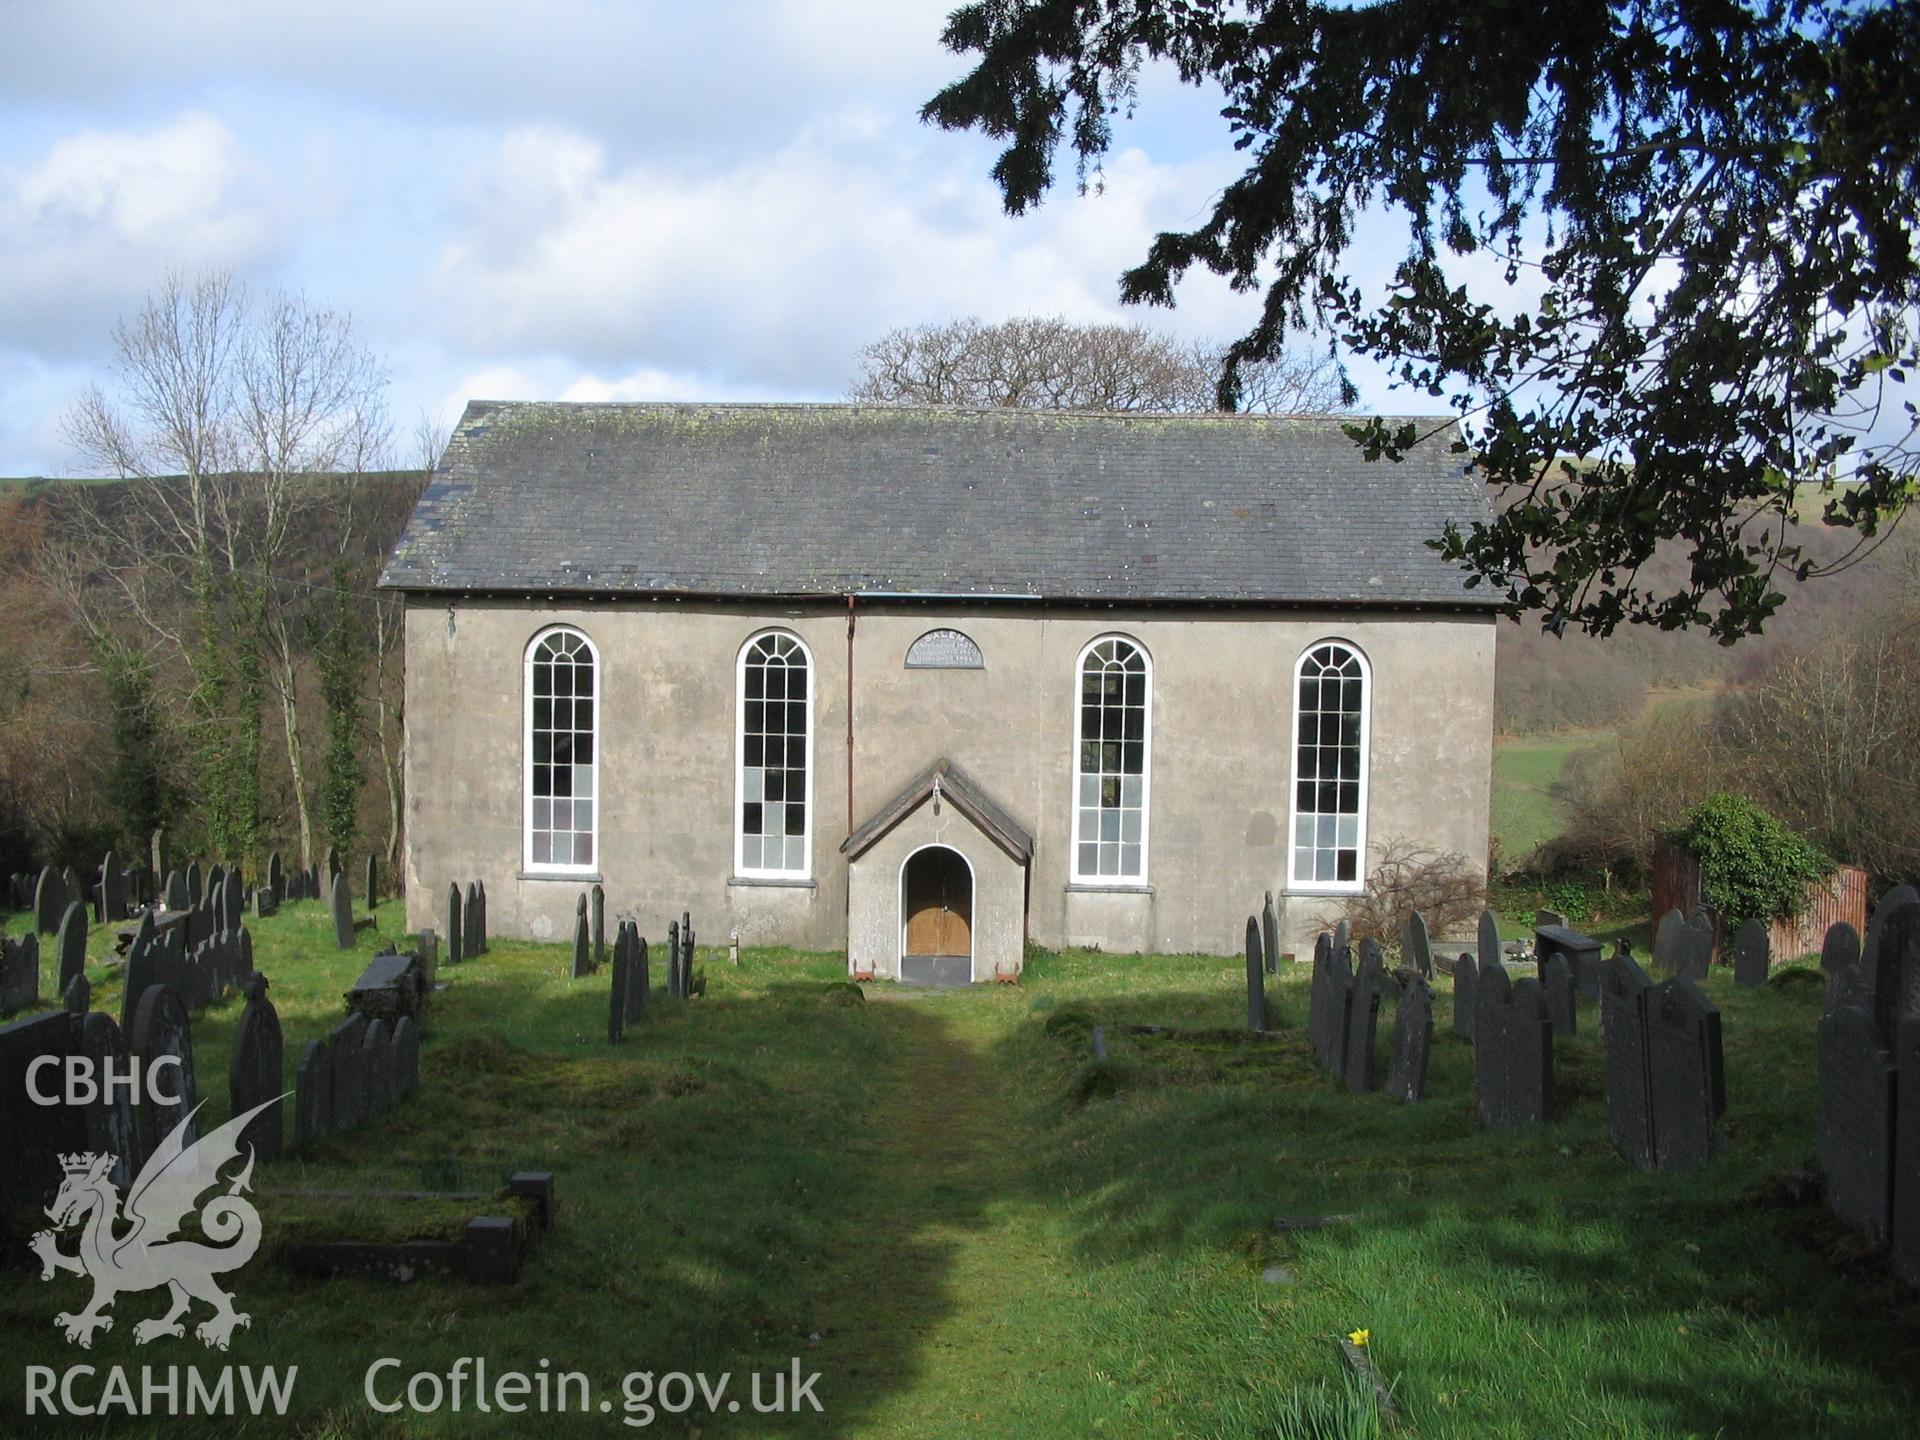 Colour digital photograph showing the front exterior of Salem Welsh Independent Chapel, Trefeurig.